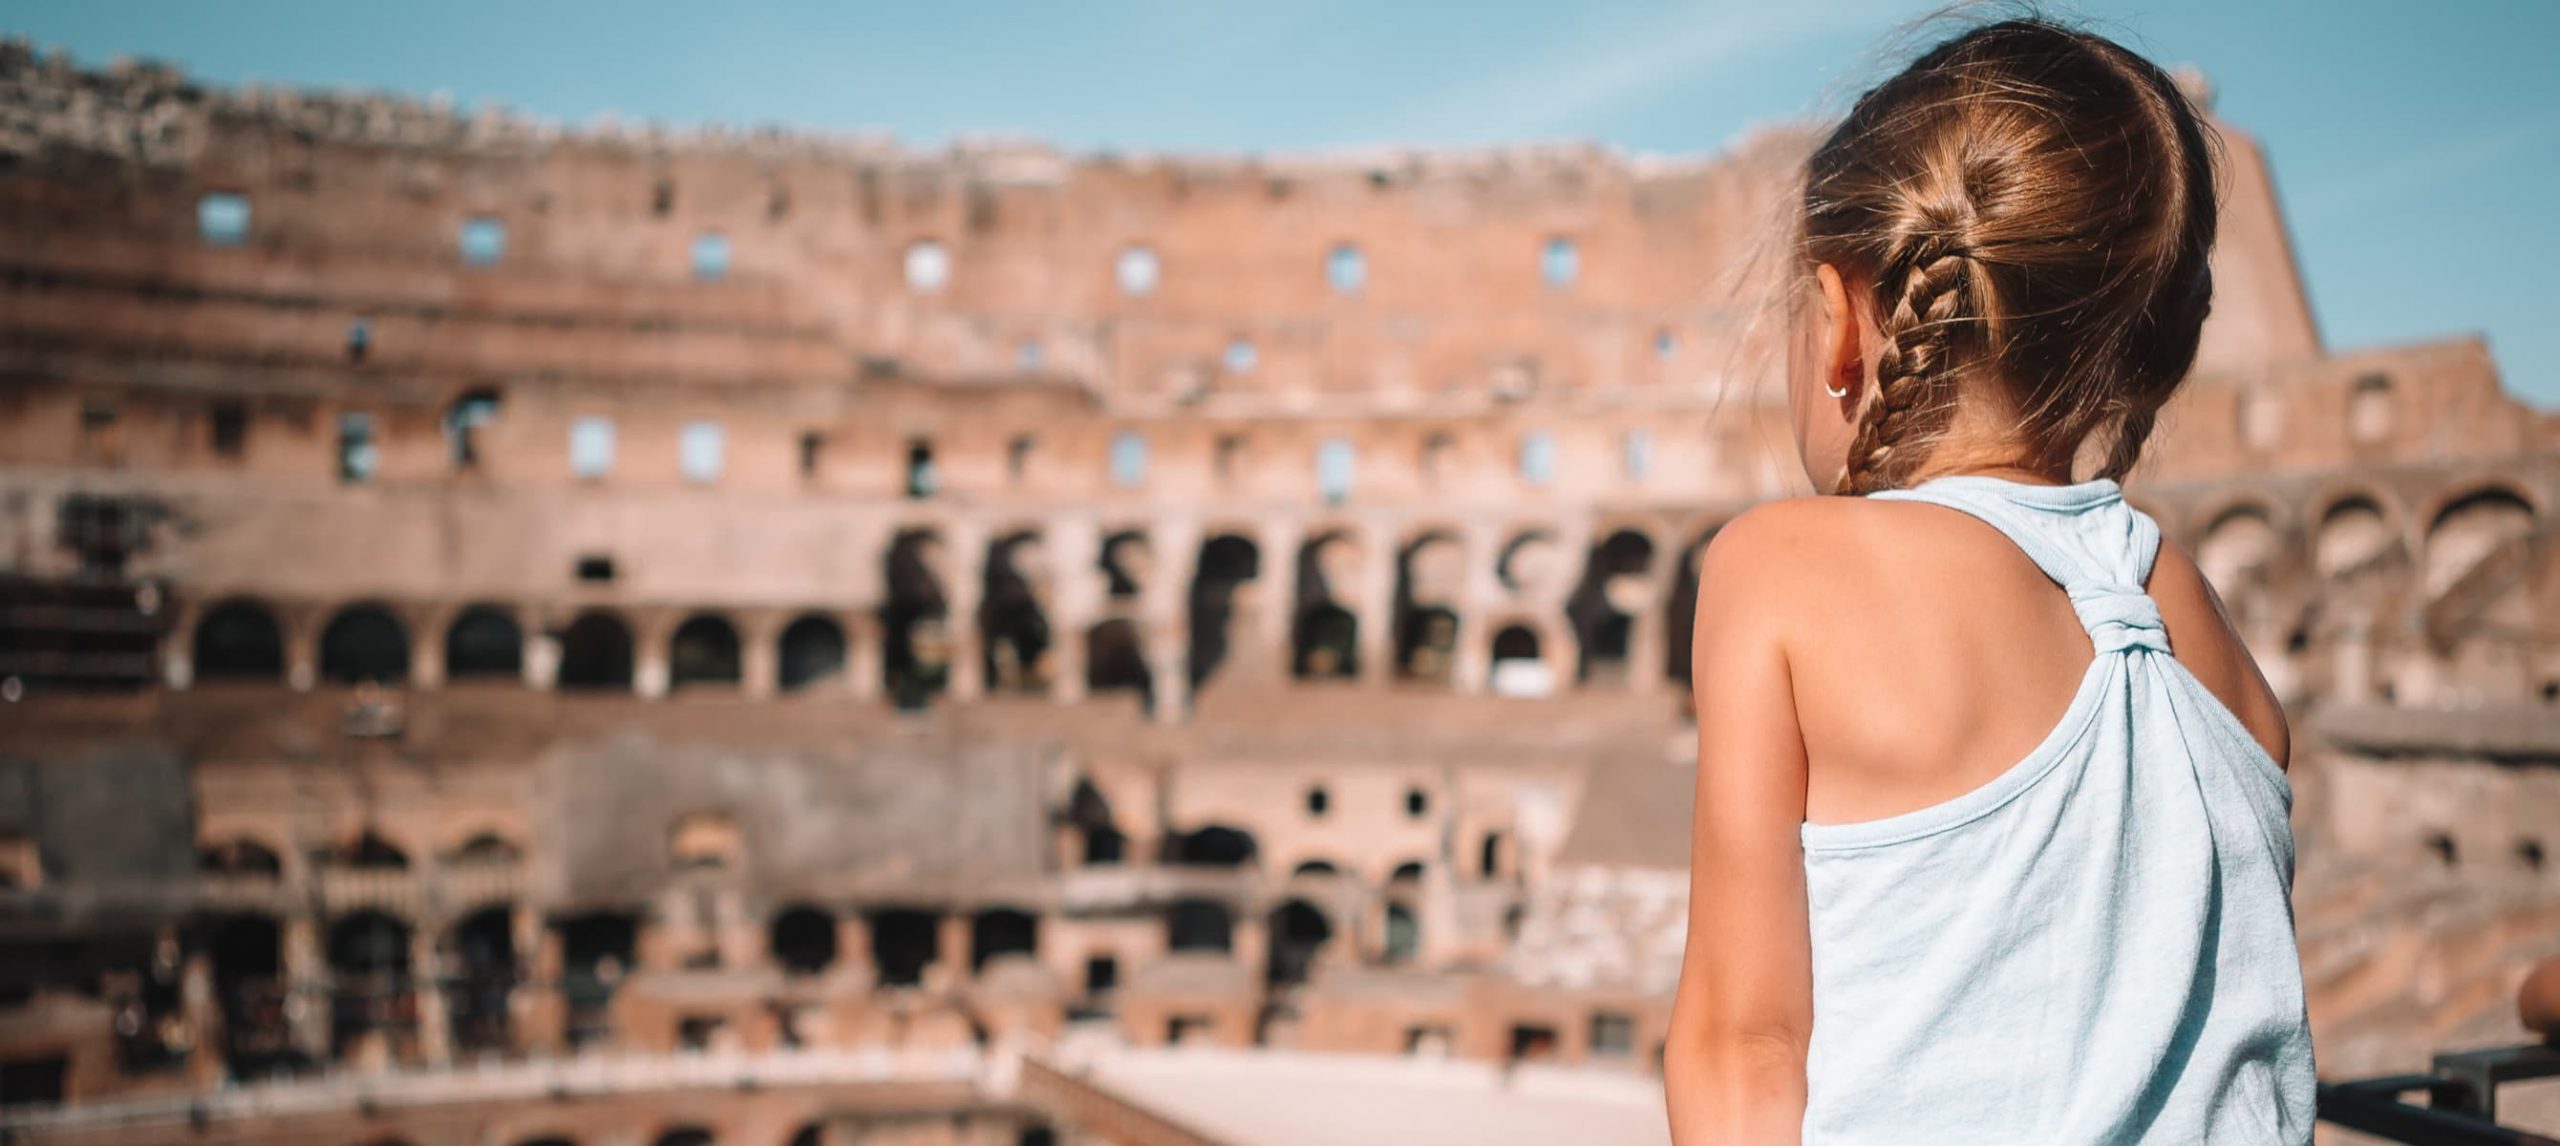 A little girl marveling at the Colosseum, in Rome, Italy